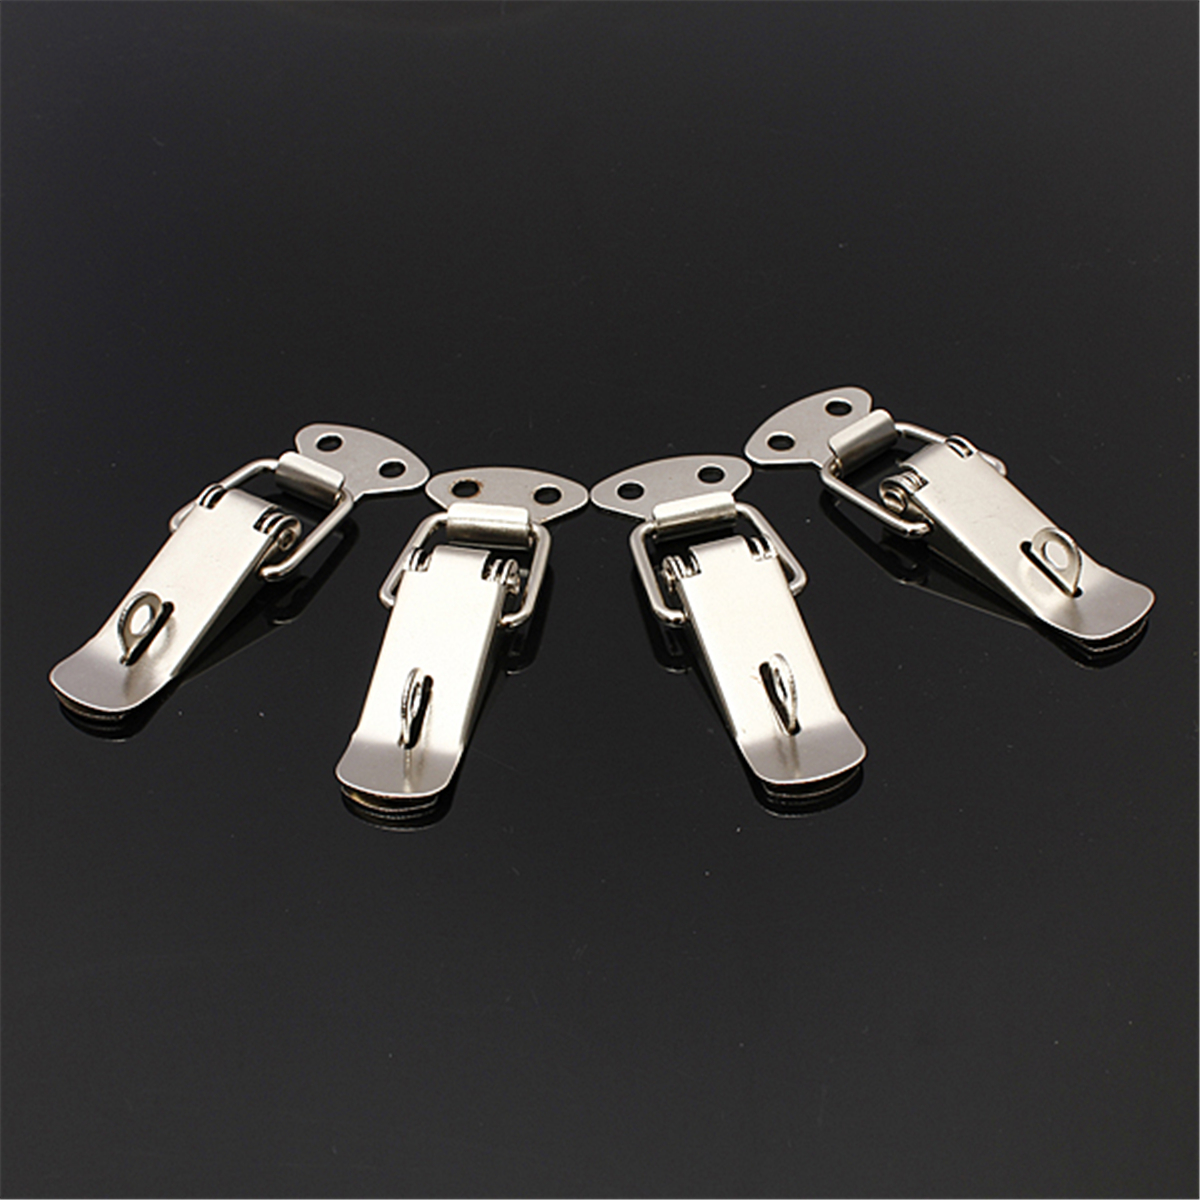 4PCS-Case-Box-Chest-Spring-Stainless-Tone-Lock-Toggle-Latch-Catch-Clasp-948011-6